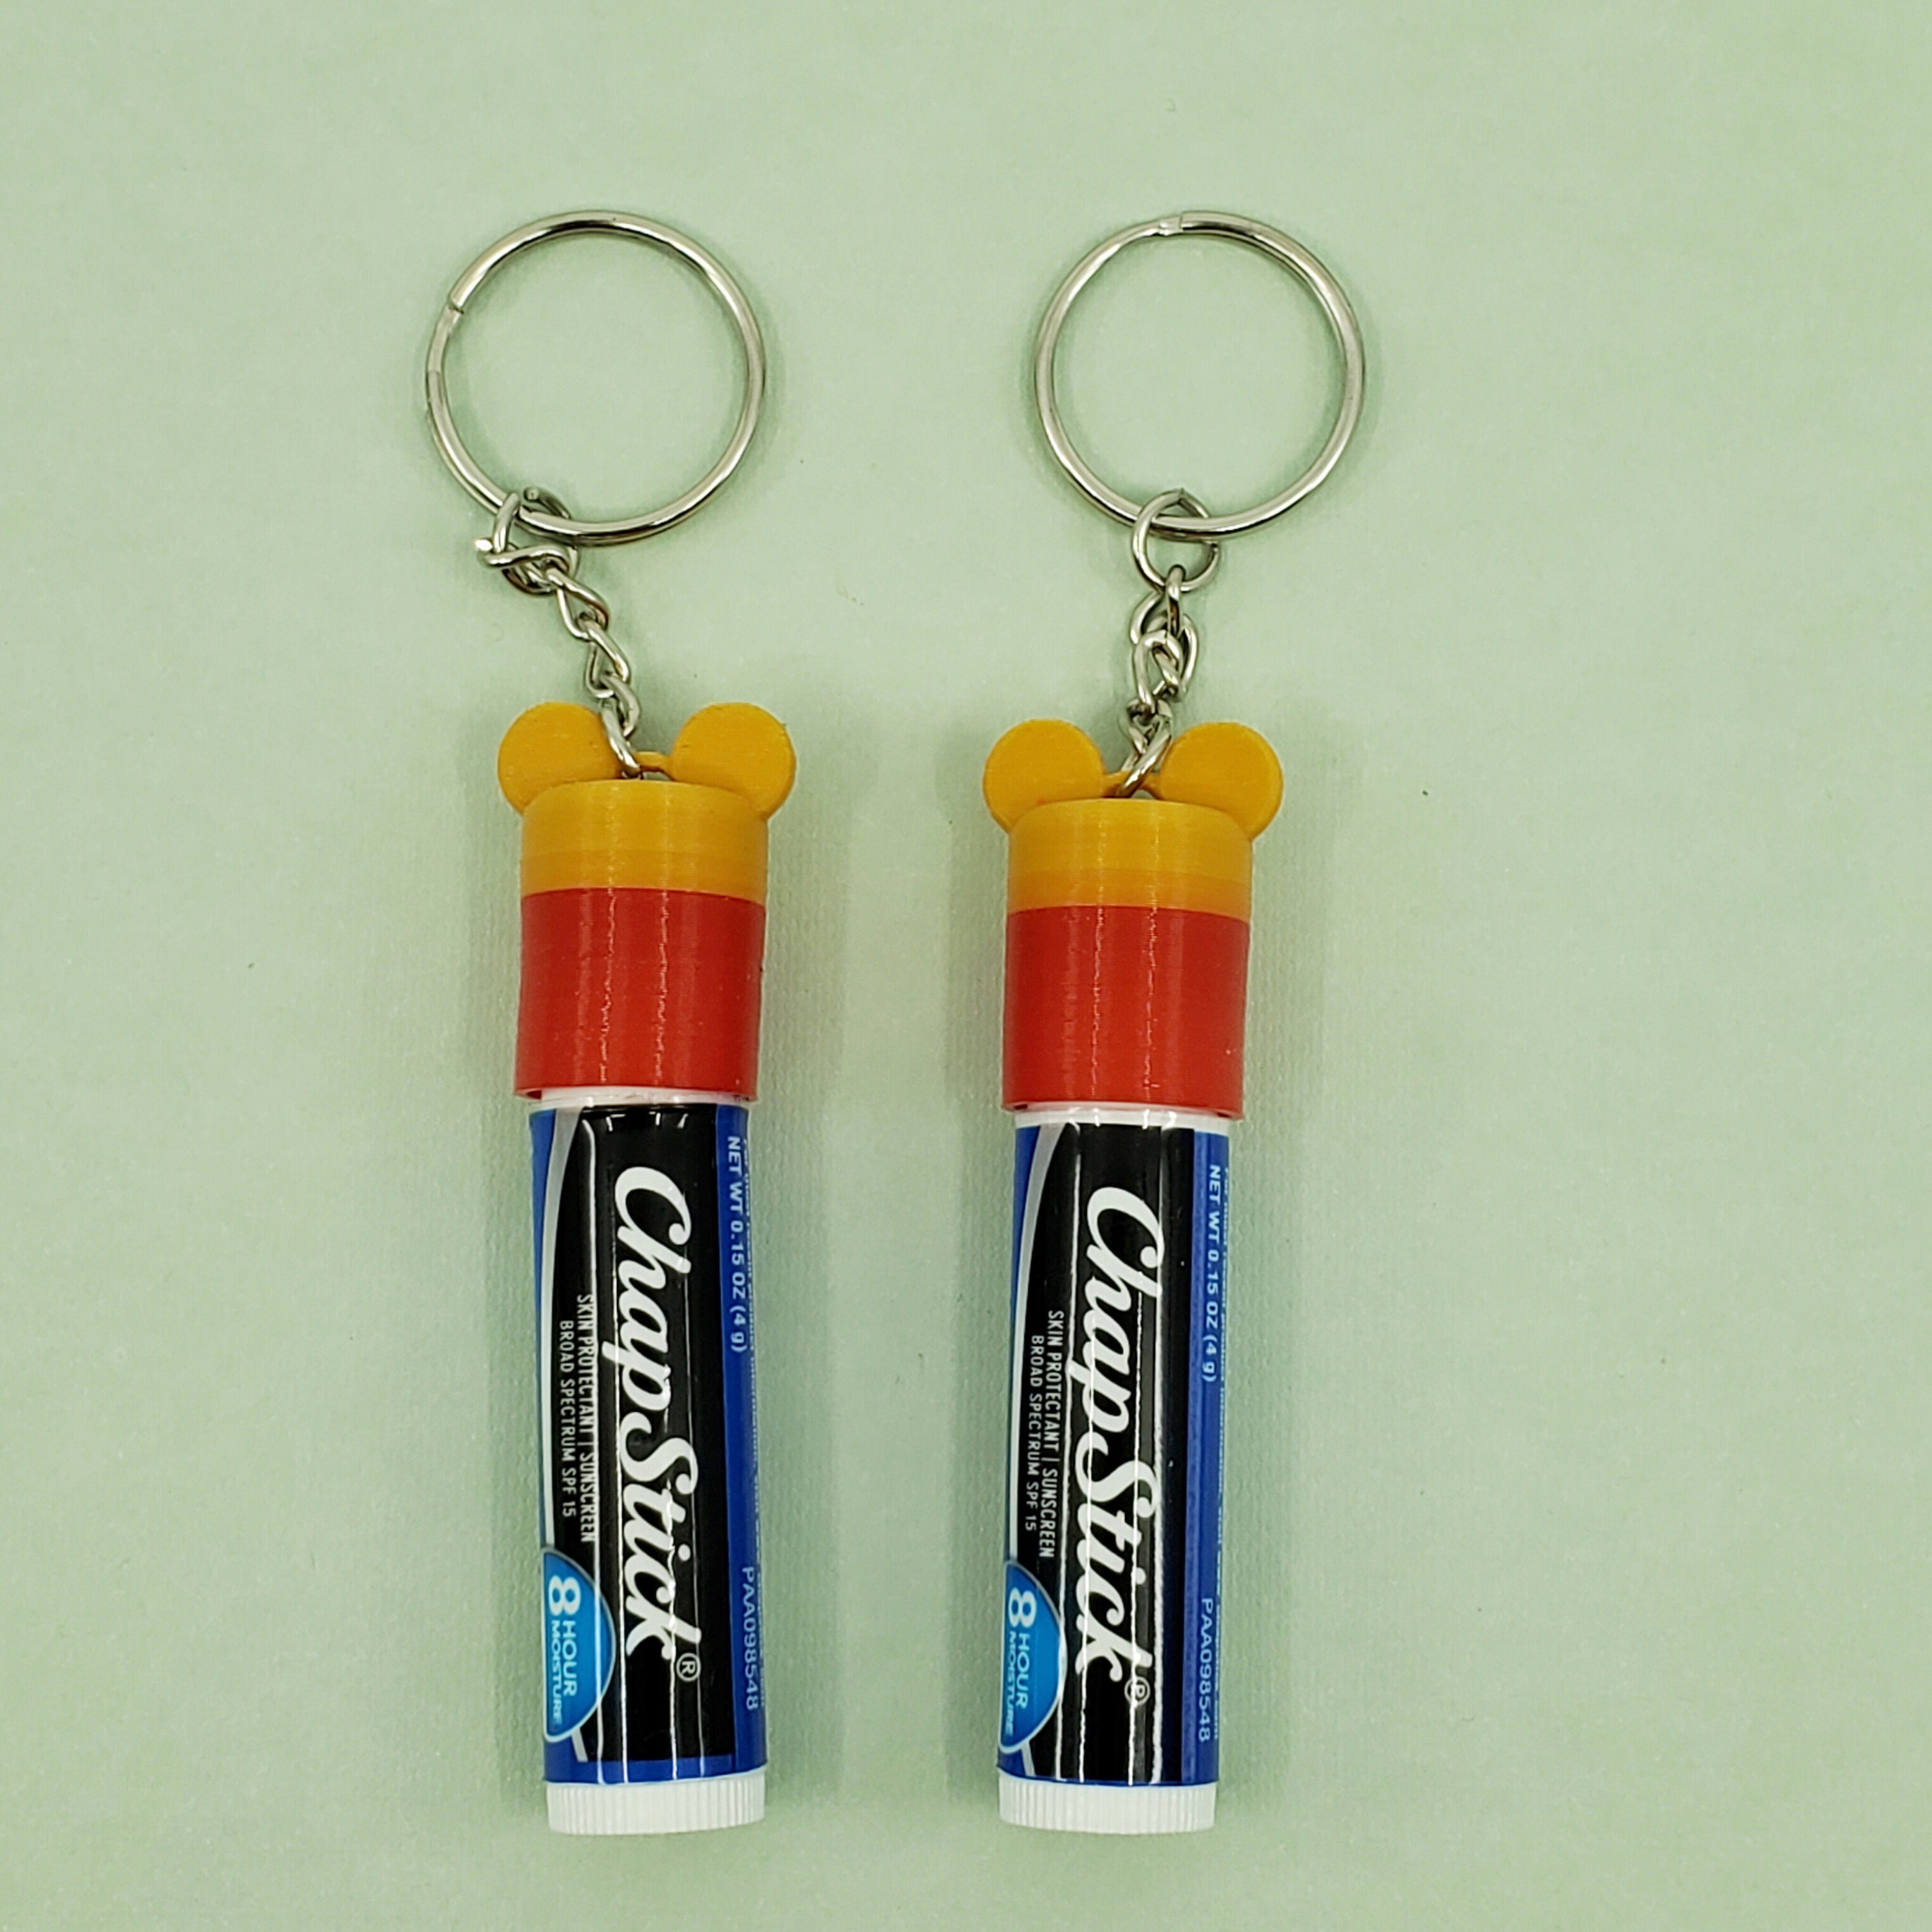 ChapStick Cap Cover Keychains: Bunny, Cat, Bear